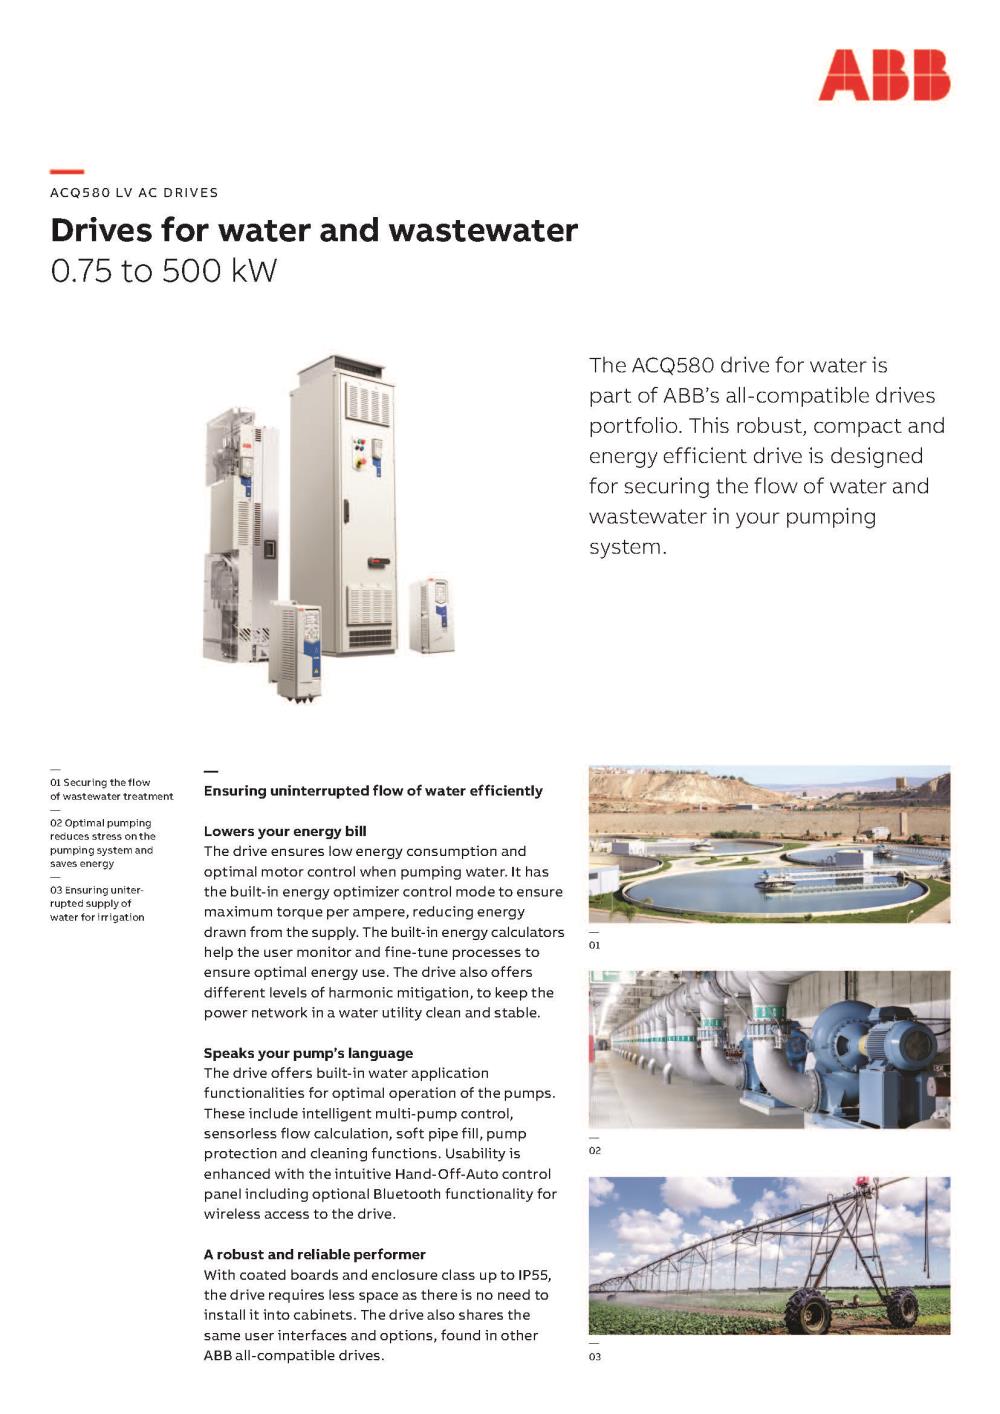 ABB ACQ580 - drives for water and wastewater